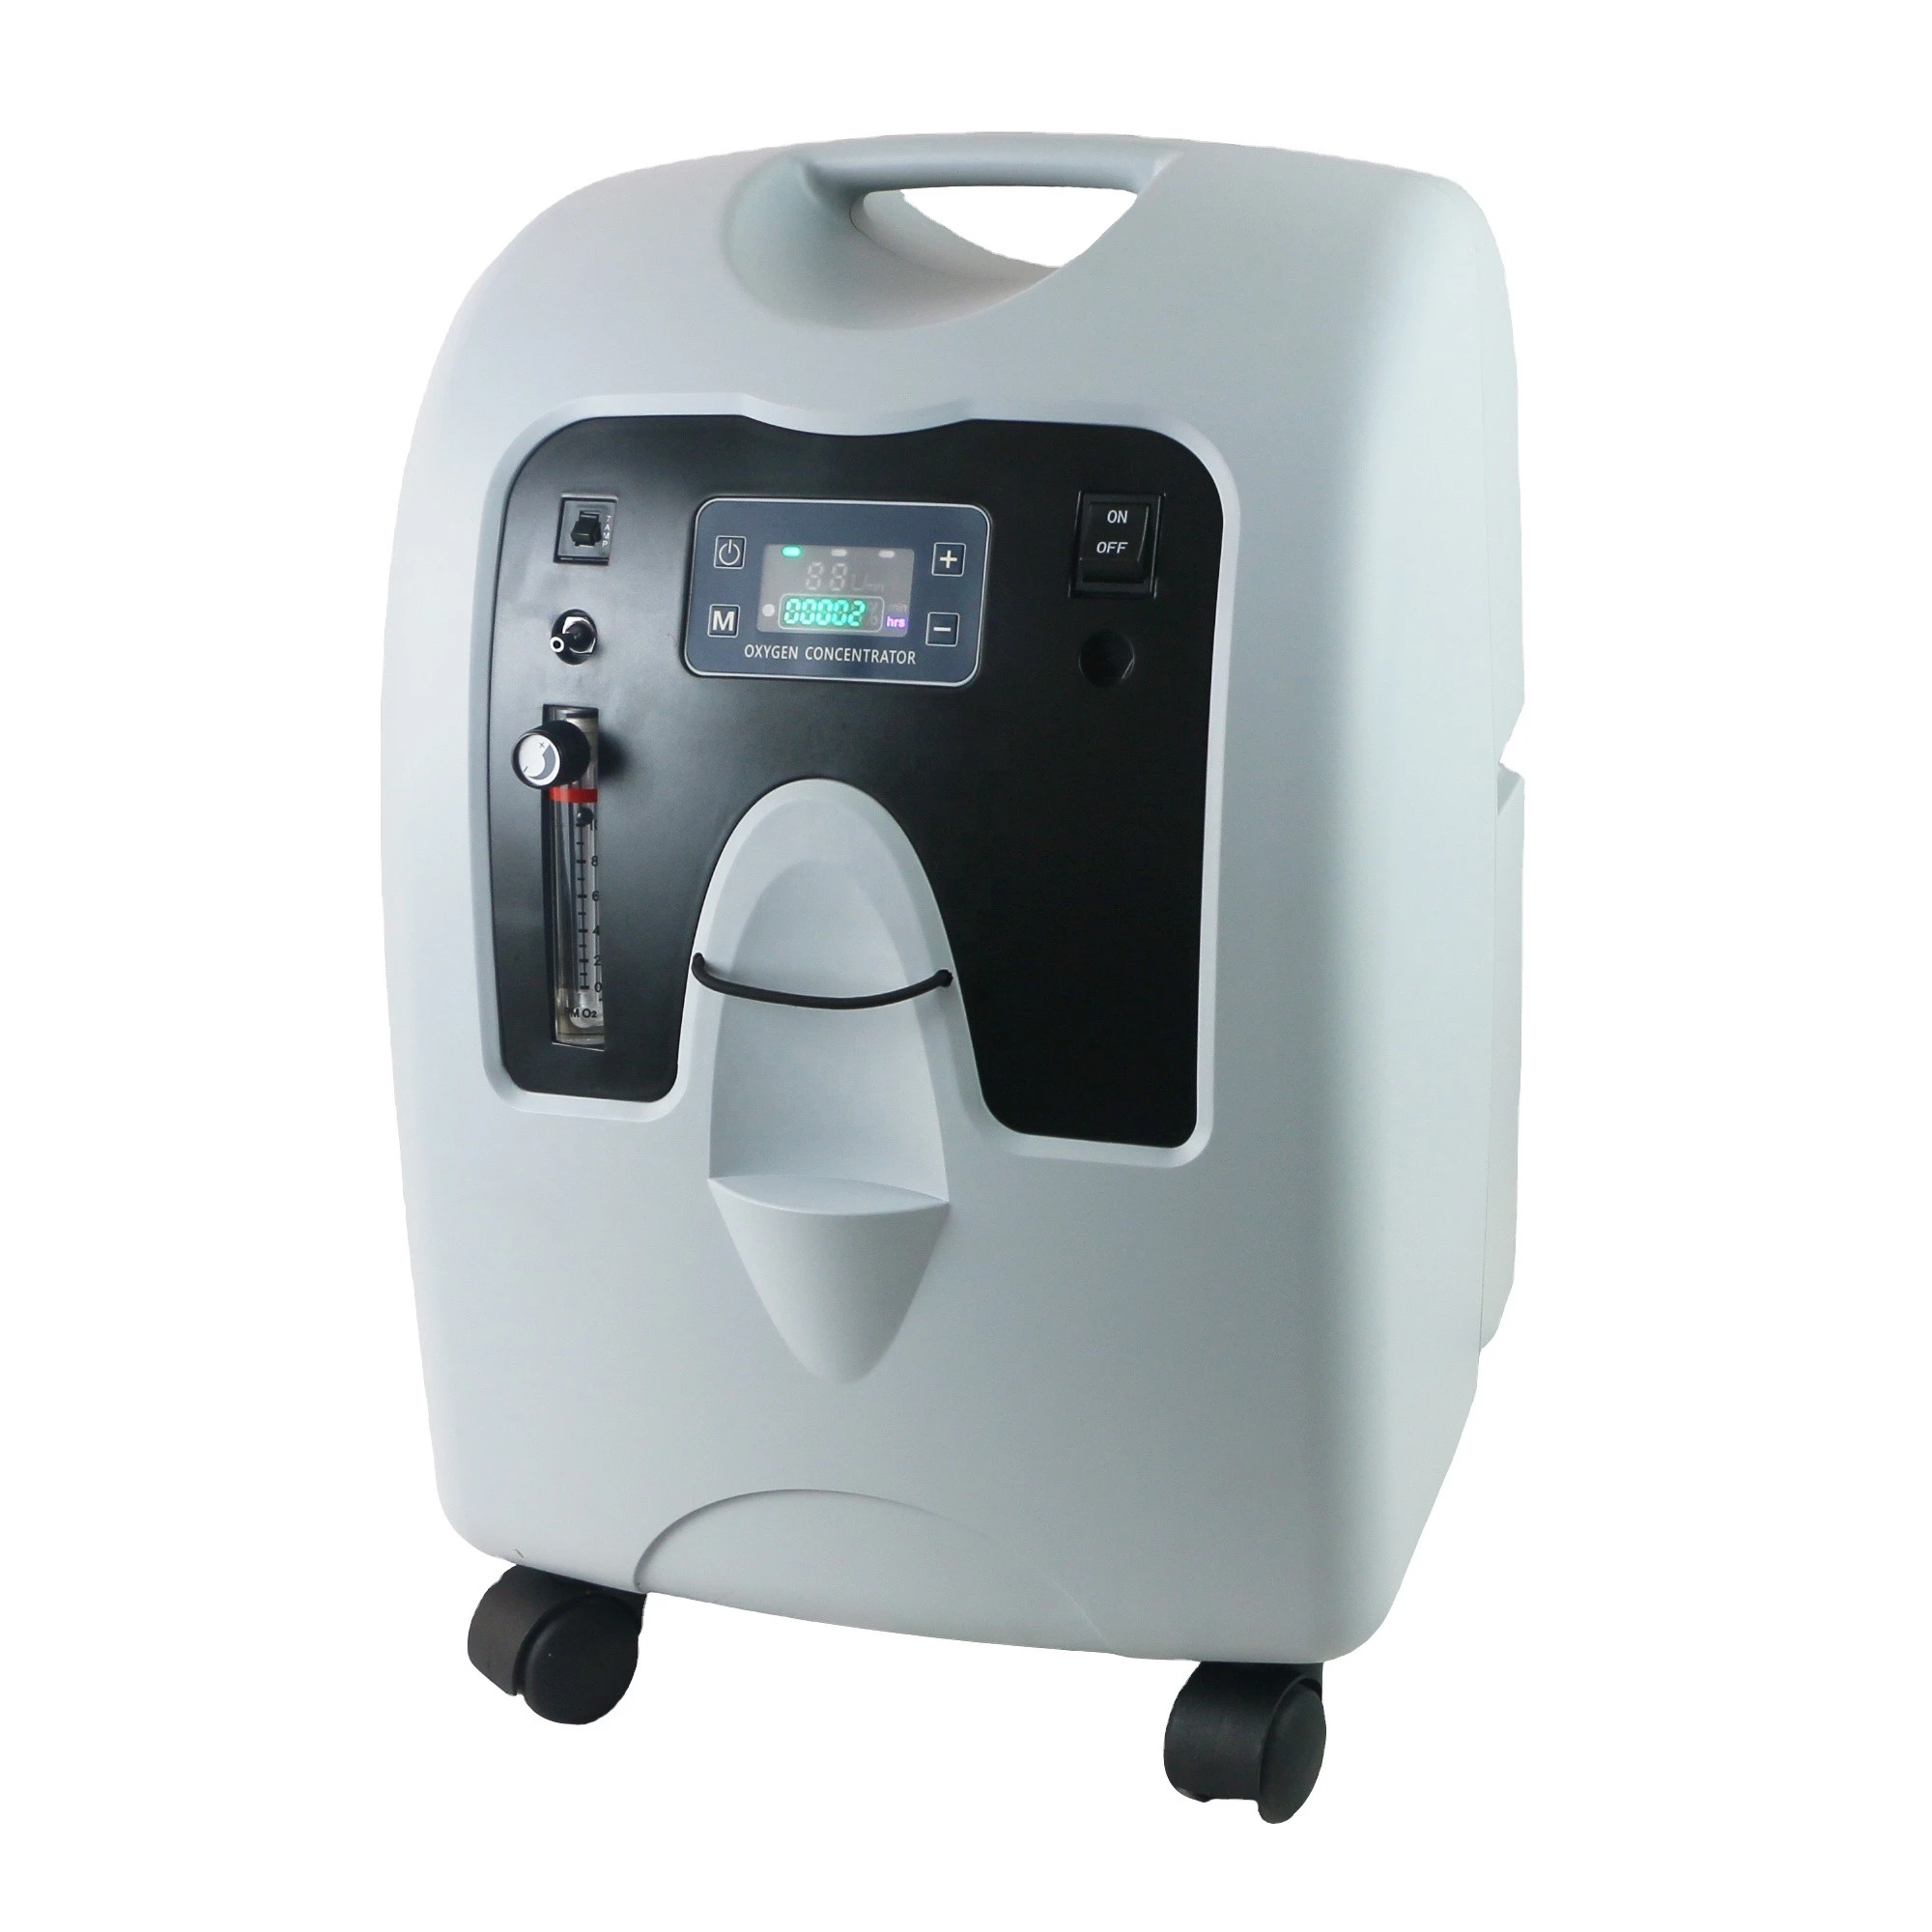 Hacenor medical physical therapy equipments high purity medical oxygen concentrator 10l medical 96%